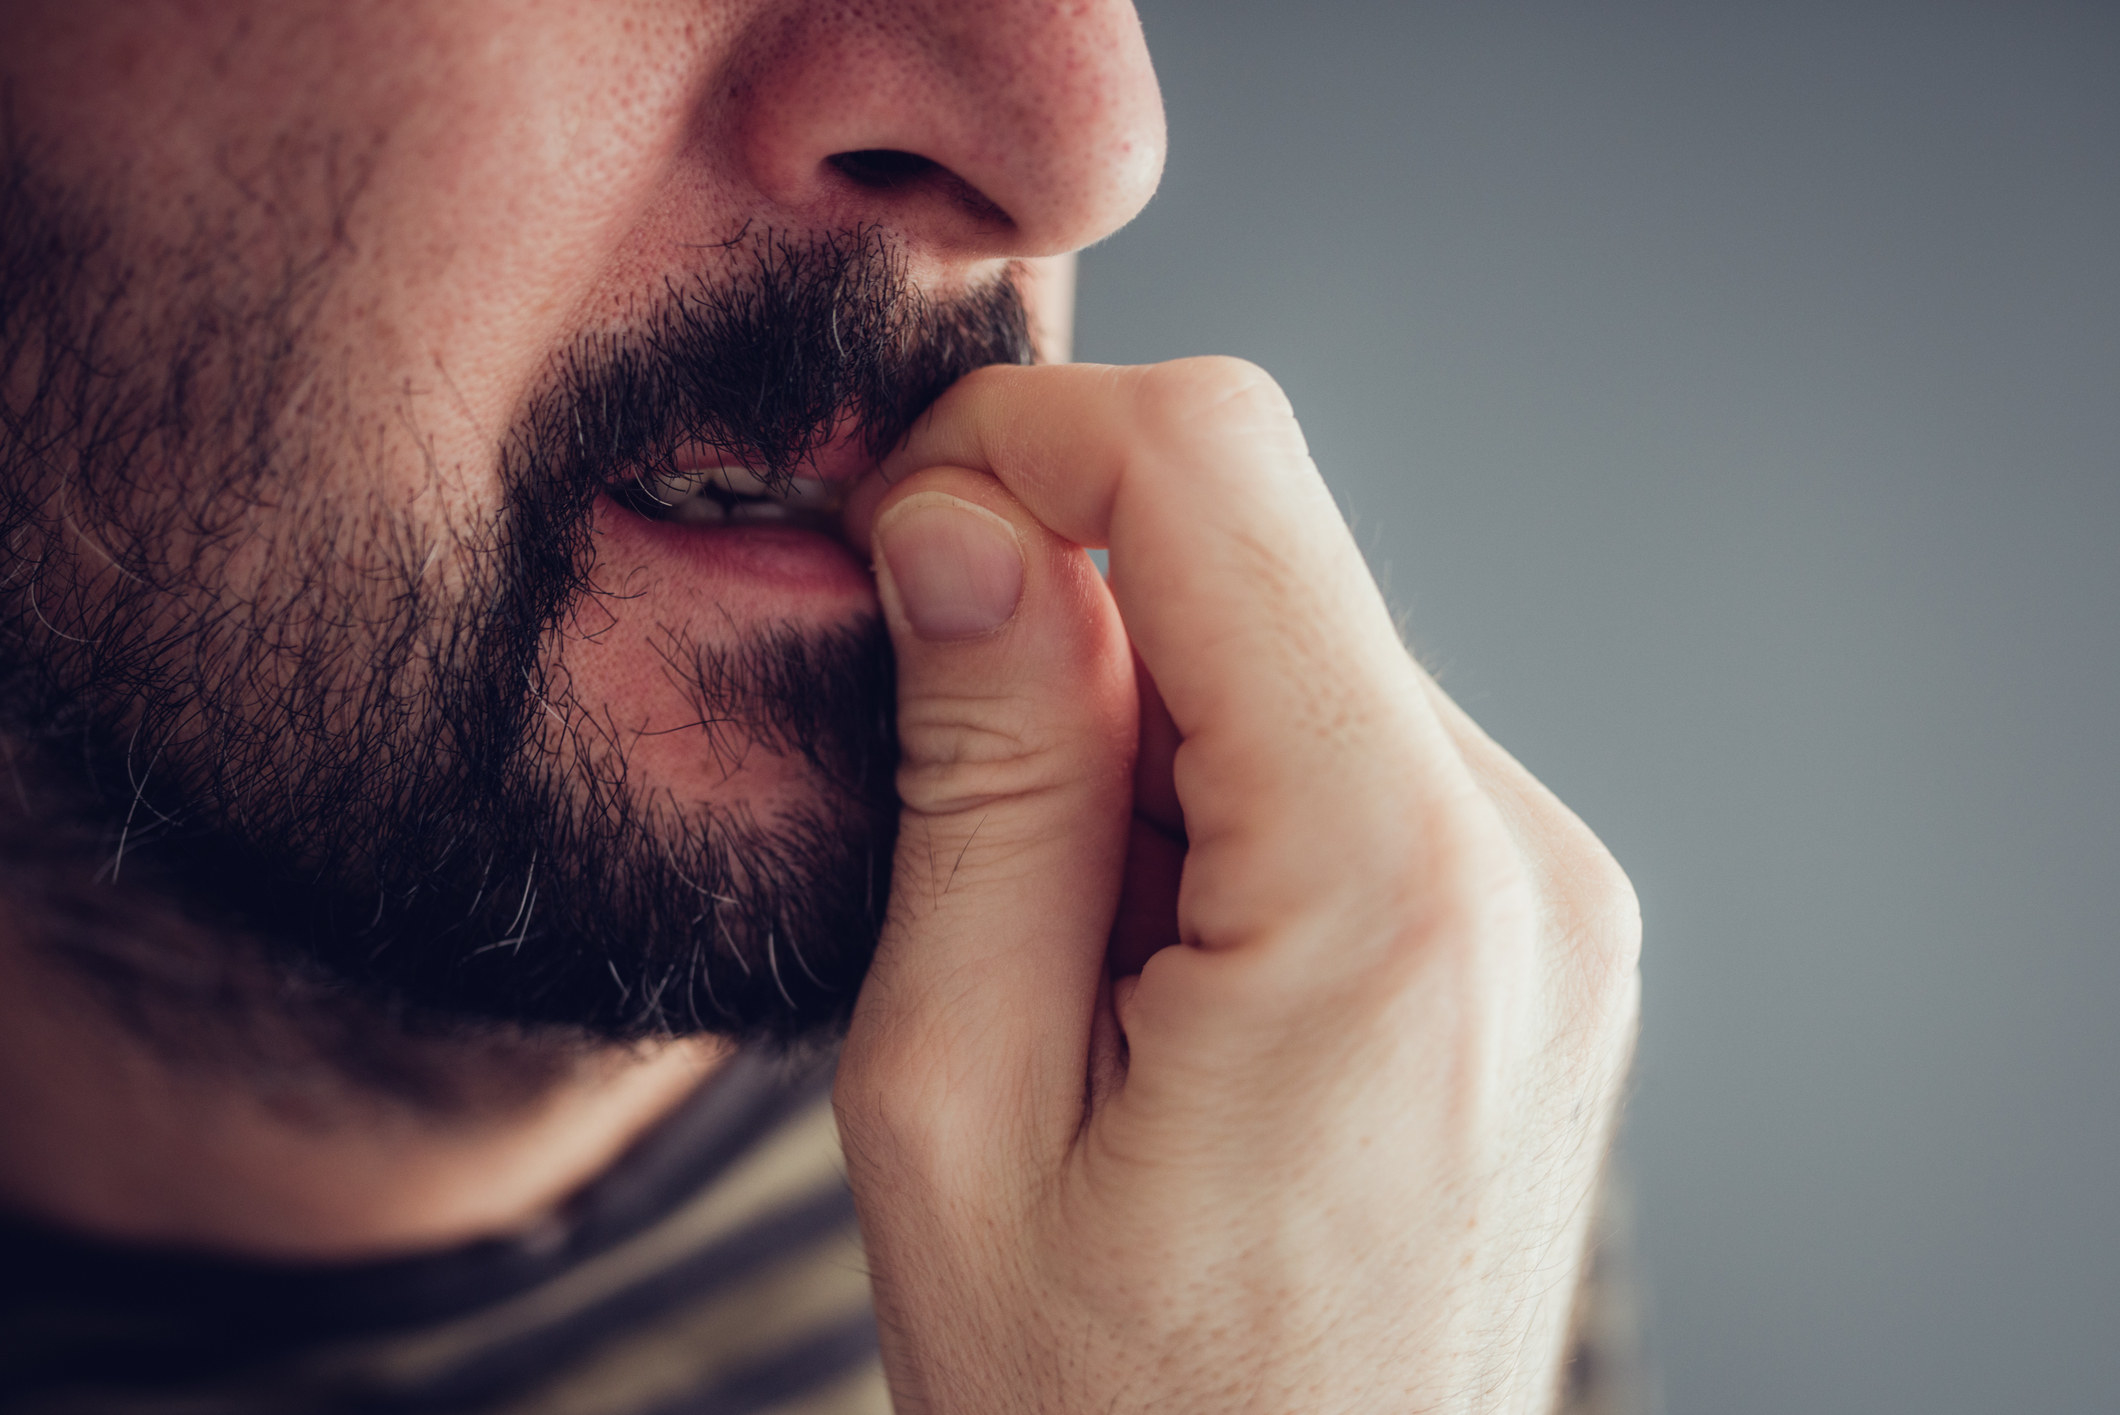 Close-up of a person biting their nails.